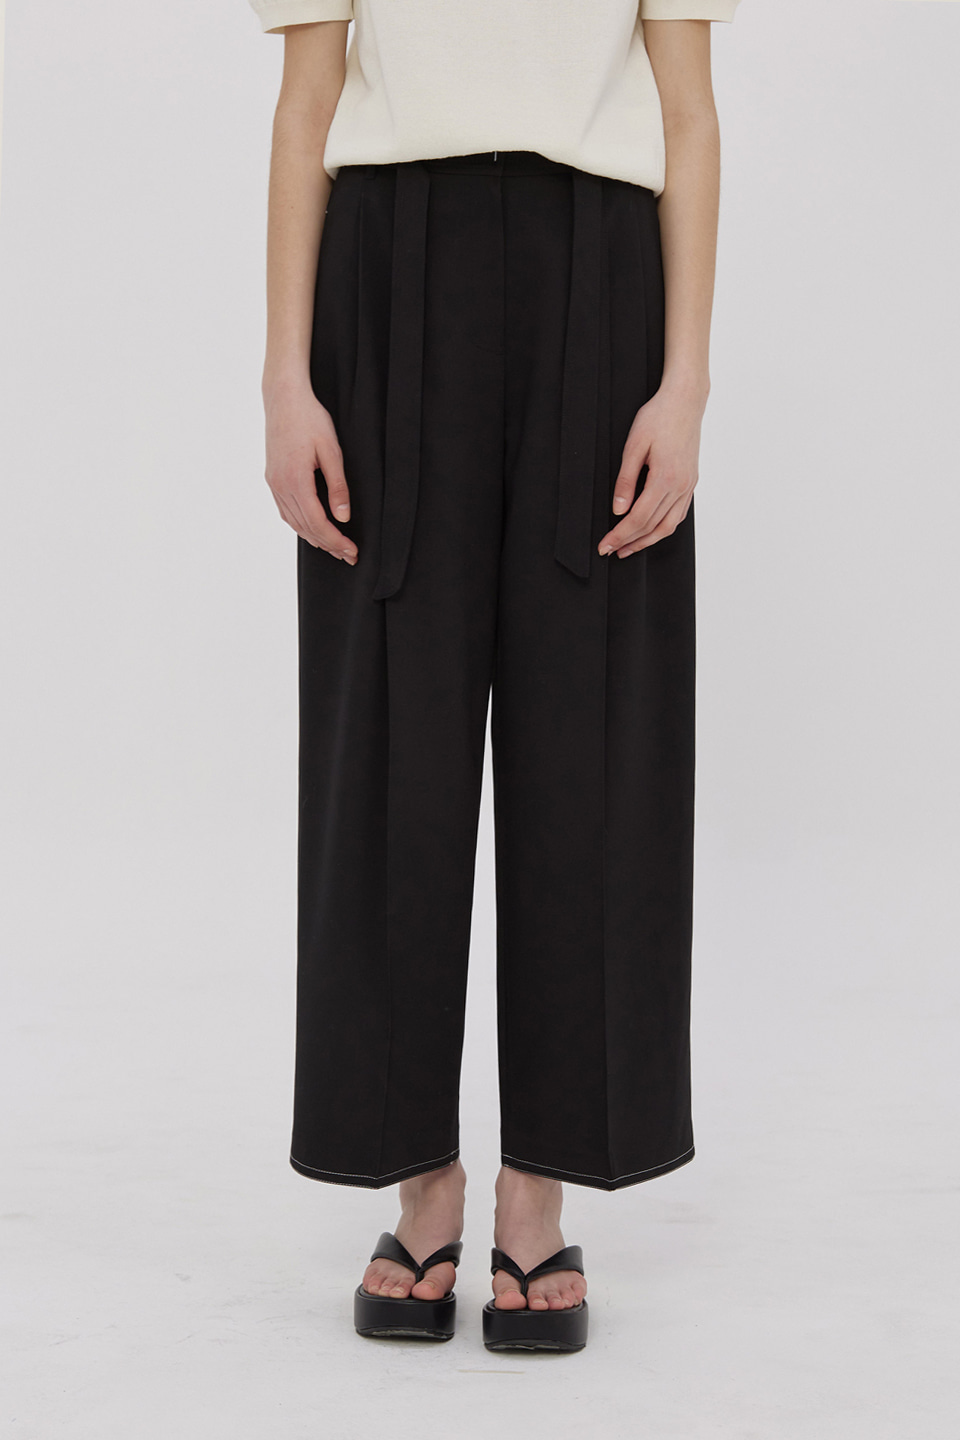 [Outlet] Two Tuck Stitch Pants_BLACK